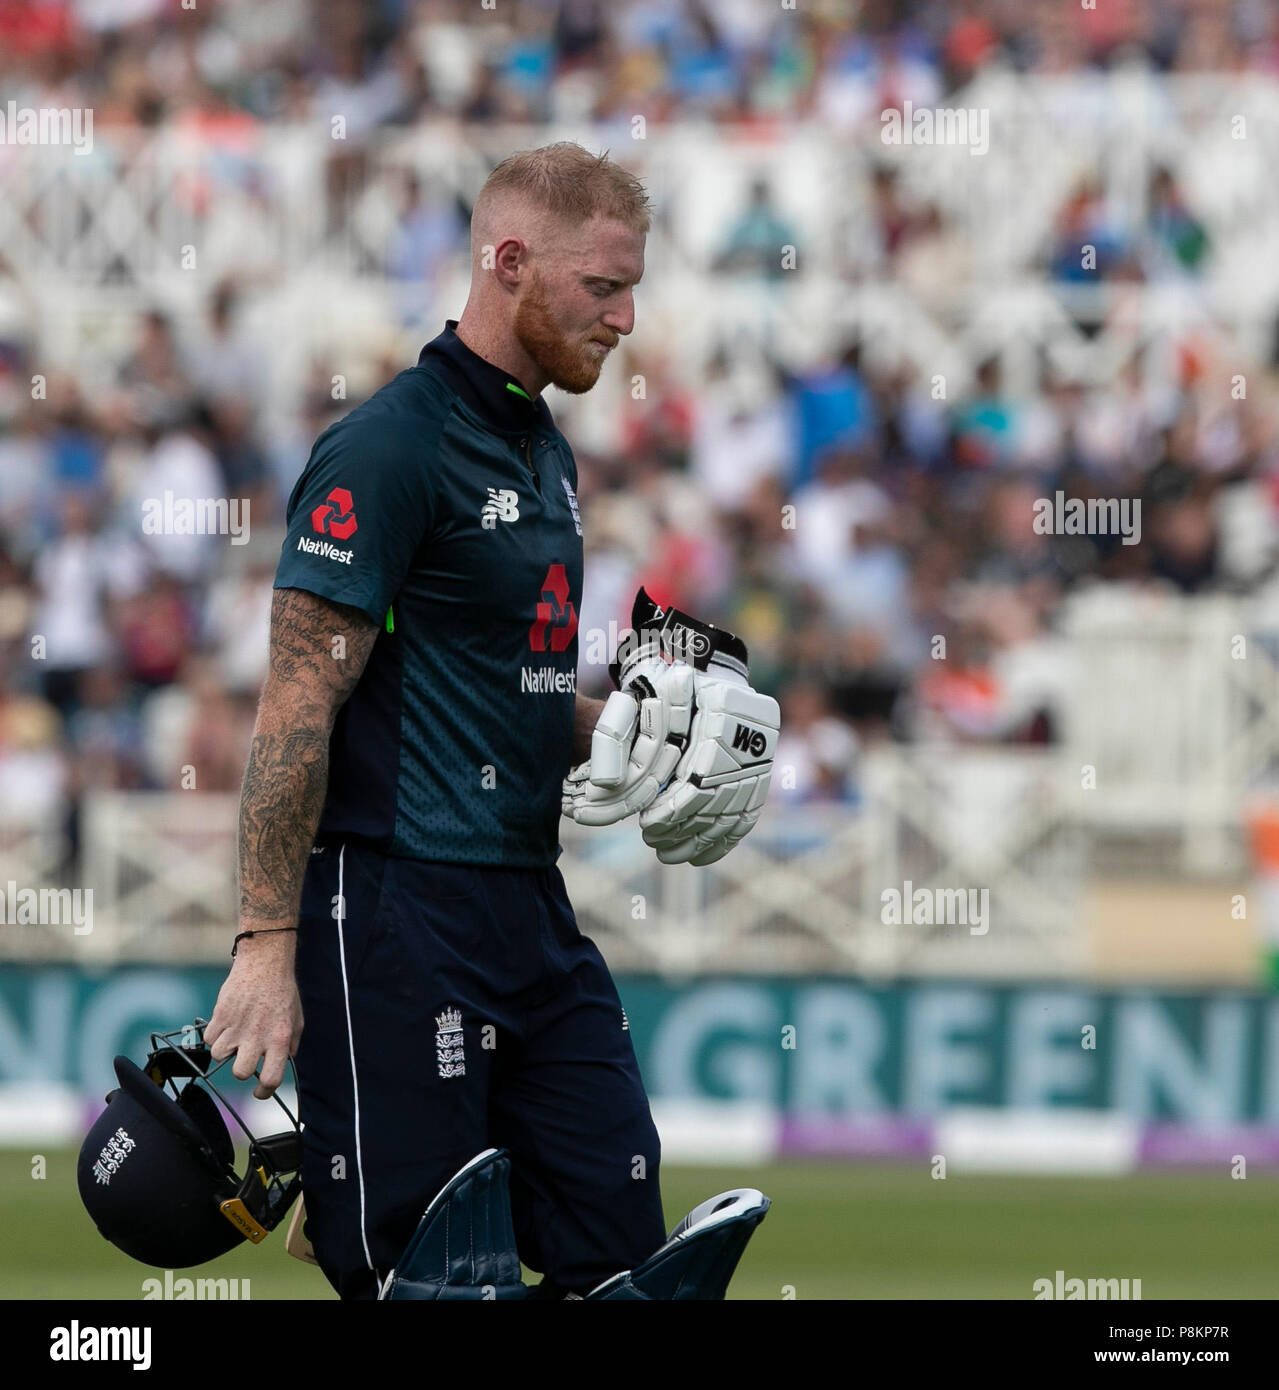 Nottingham, UK. 12th July 2018, Royal London, One Day International, England v India, Trent Bridge, Ben Stokes leaves the field after being caught off the bowling of Kuldeep Yadav for 50 Credit: David Kissman/Alamy Live News Stock Photo